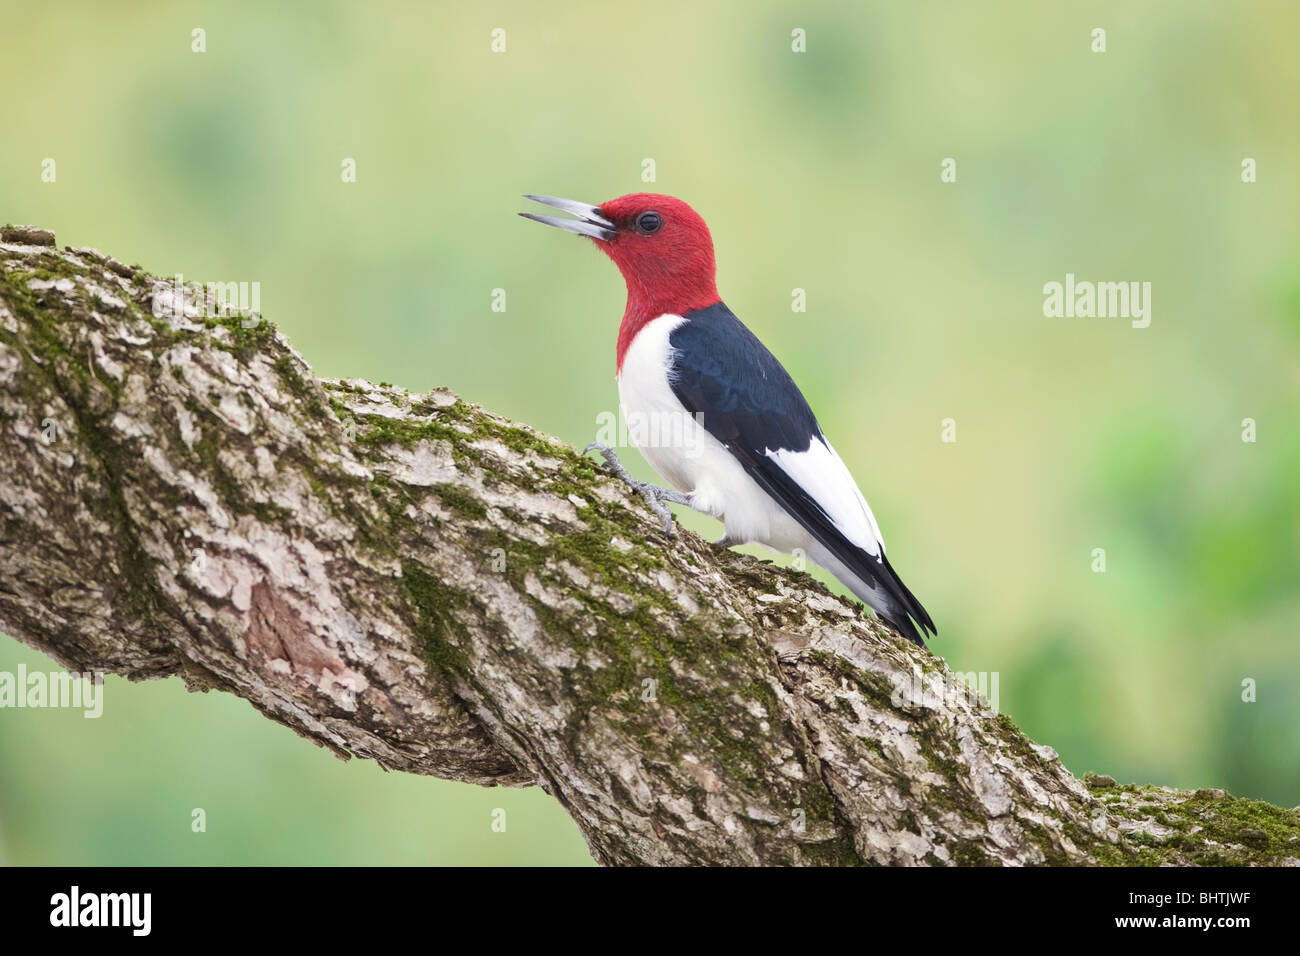 Red-headed Woodpecker perched on Twisted Grape Vine Stock Photo